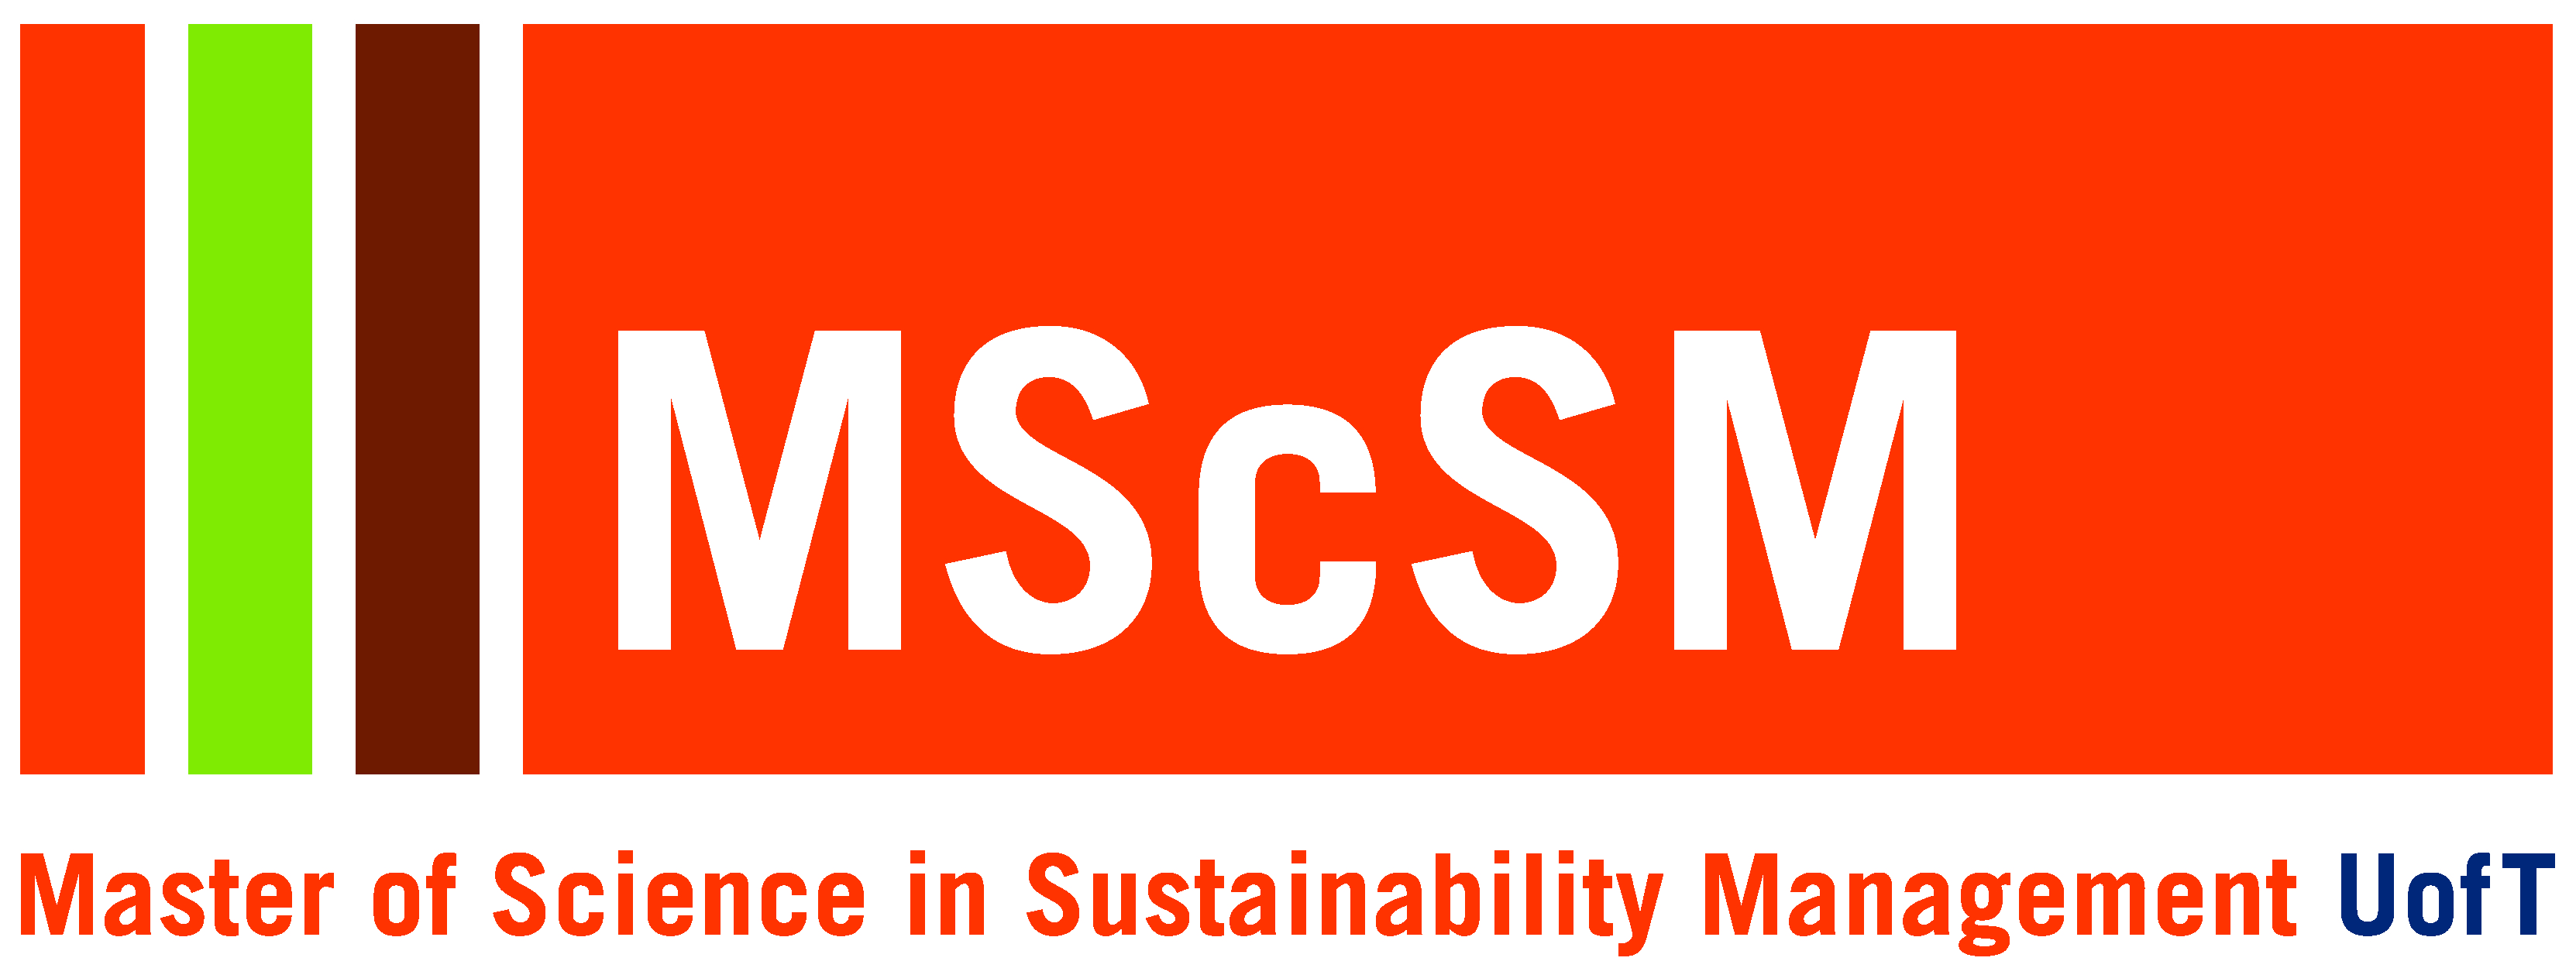 Showcase Image for Master of Science in Sustainability Management (MScSM)